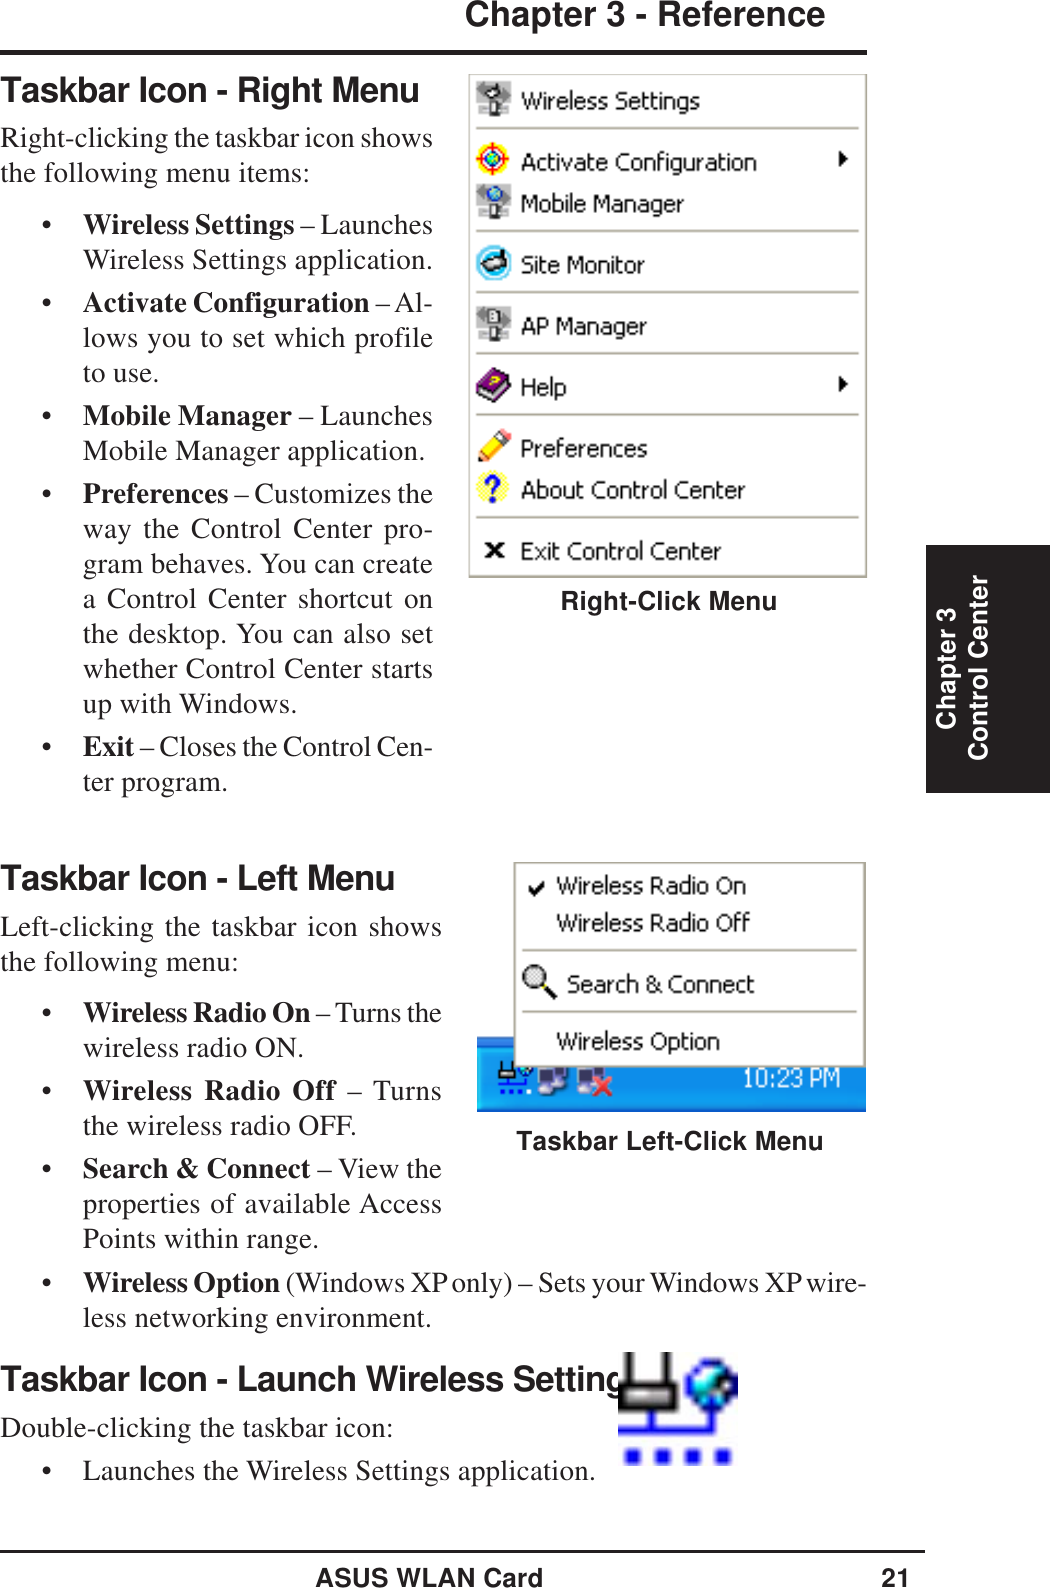 ASUS WLAN Card 21Chapter 3 - ReferenceChapter 3Control CenterTaskbar Icon - Left MenuLeft-clicking the taskbar icon showsthe following menu:•Wireless Radio On – Turns thewireless radio ON.•Wireless Radio Off – Turnsthe wireless radio OFF.•Search &amp; Connect – View theproperties of available AccessPoints within range.•Wireless Option (Windows XP only) – Sets your Windows XP wire-less networking environment.Taskbar Icon - Launch Wireless SettingsDouble-clicking the taskbar icon:• Launches the Wireless Settings application.Taskbar Left-Click MenuTaskbar Icon - Right MenuRight-clicking the taskbar icon showsthe following menu items:•Wireless Settings – LaunchesWireless Settings application.•Activate Configuration – Al-lows you to set which profileto use.•Mobile Manager – LaunchesMobile Manager application.•Preferences – Customizes theway the Control Center pro-gram behaves. You can createa Control Center shortcut onthe desktop. You can also setwhether Control Center startsup with Windows.•Exit – Closes the Control Cen-ter program.Right-Click Menu